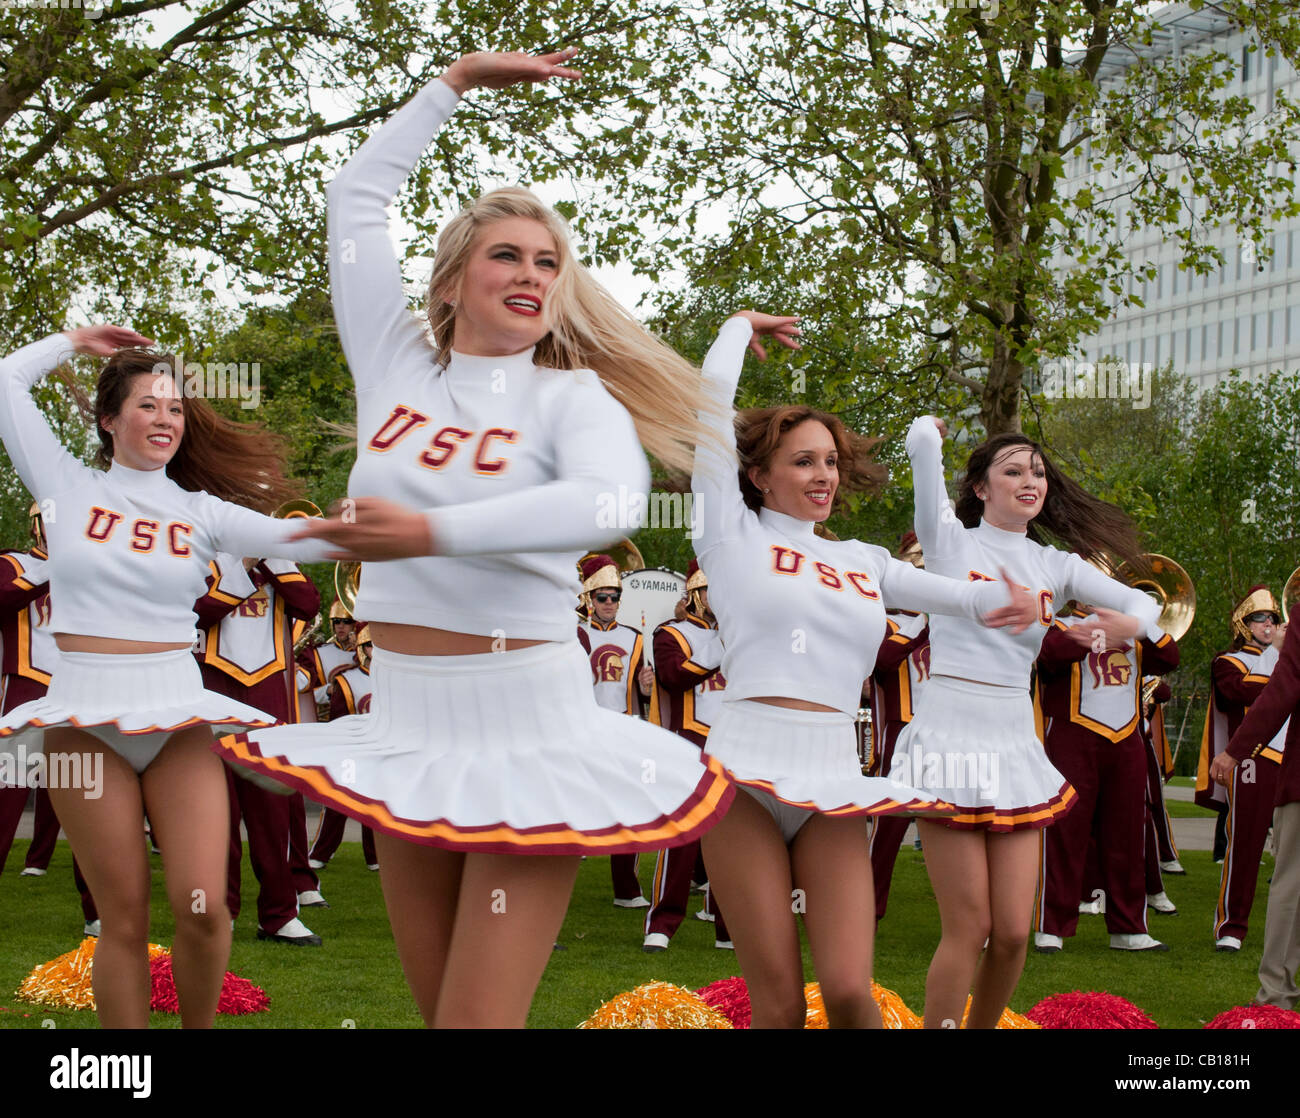 18 May 2012 London UK, The Cheerleaders of University of Southern California Trojans Marching Band show off their skills but fail to bring the sun on Potters Field in London, UK. The performance which was part of their pre-Olympic tour of London. Stock Photo